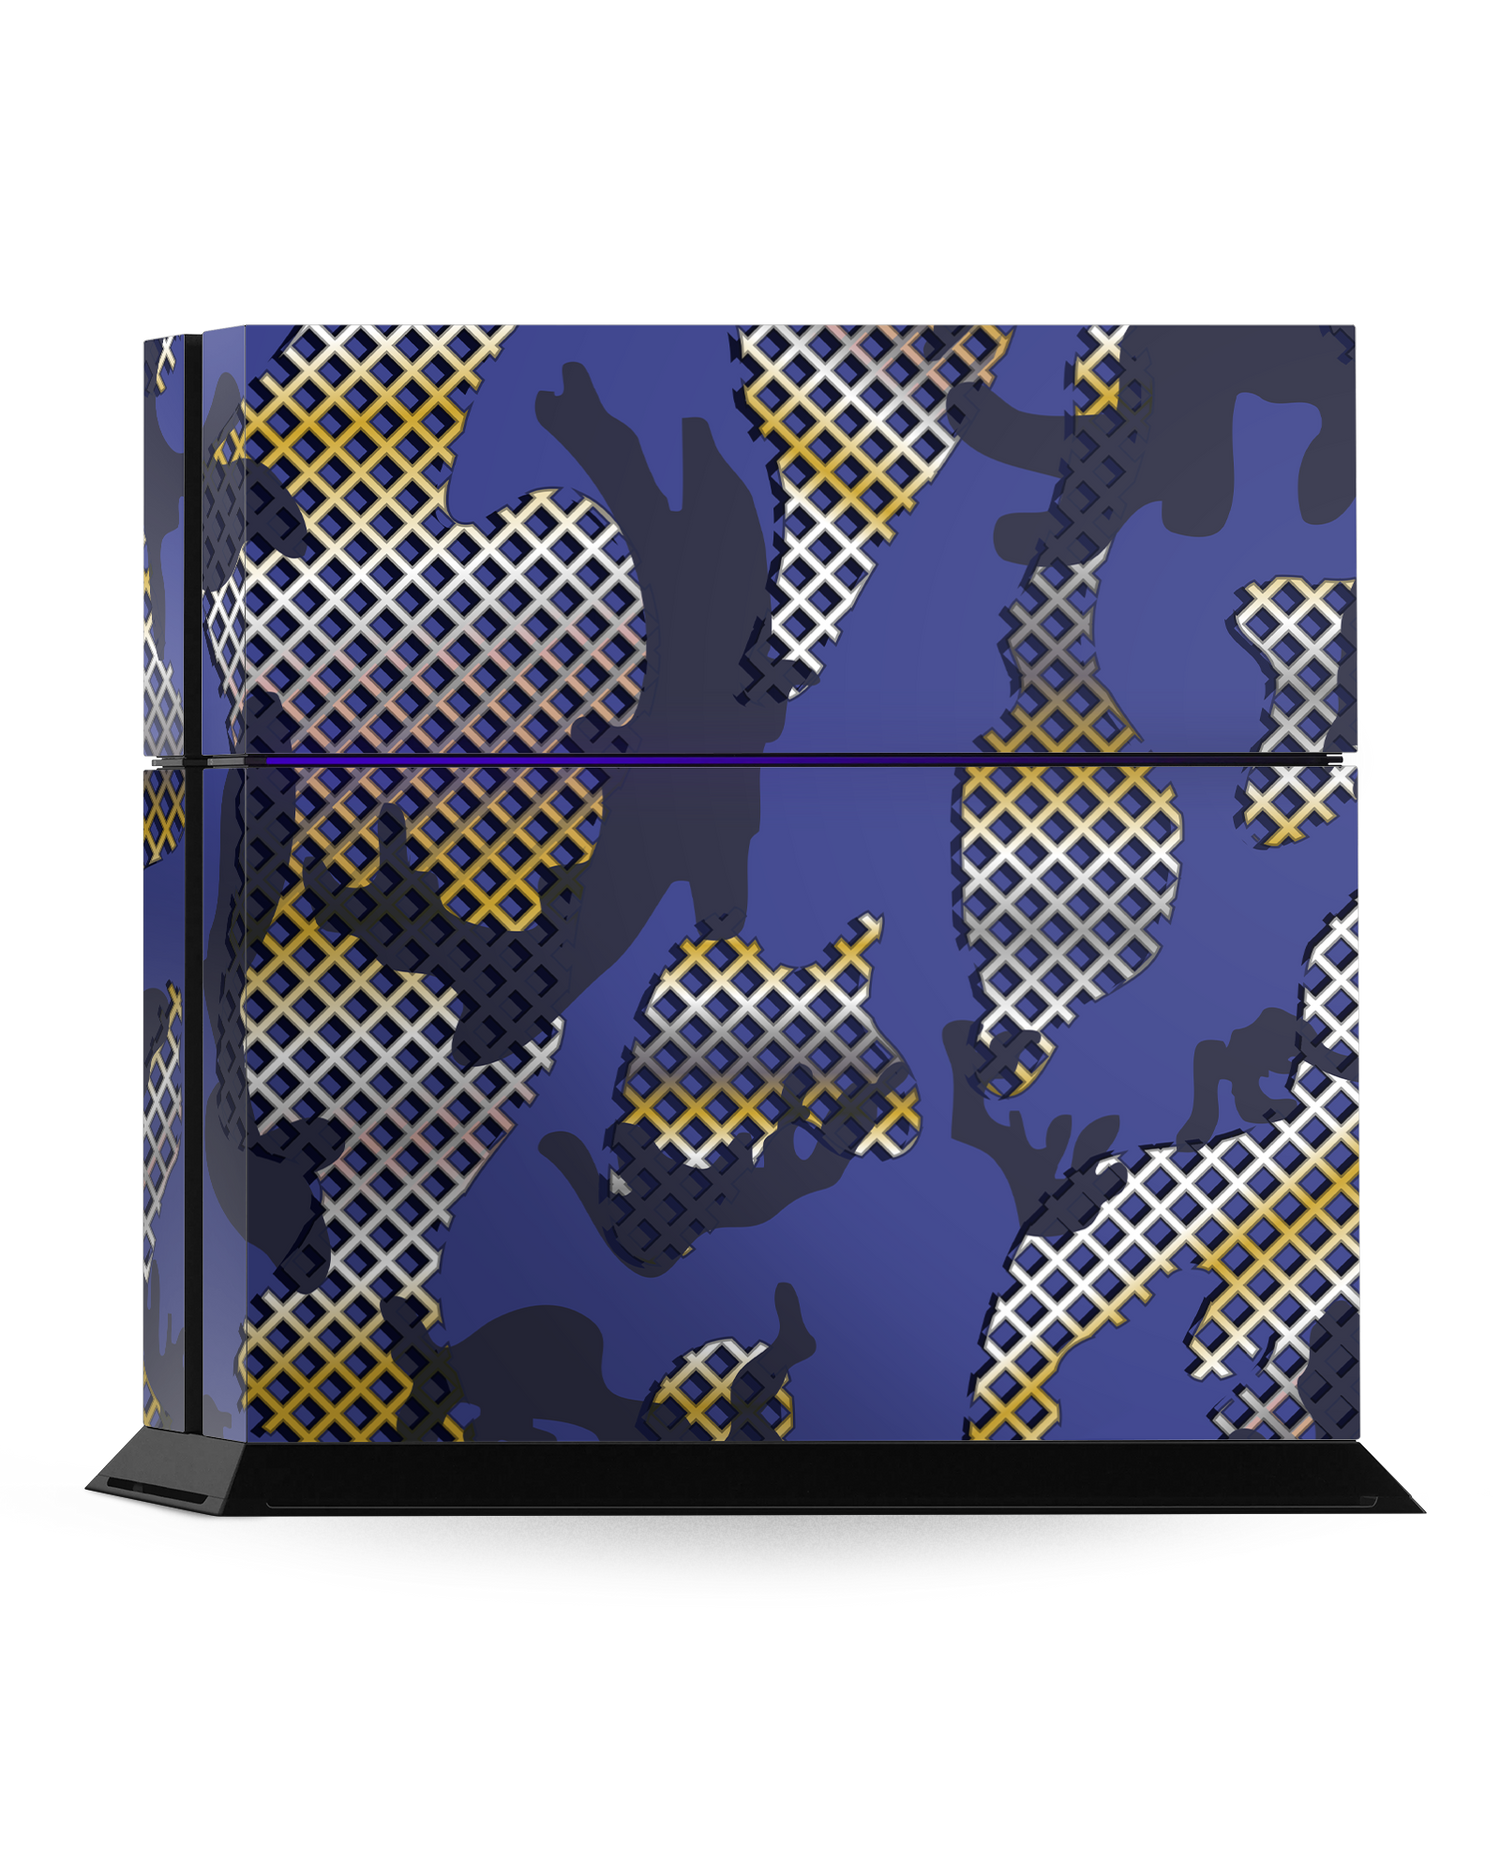 Fall Camo III Console Skin for Sony PlayStation 4: Standing